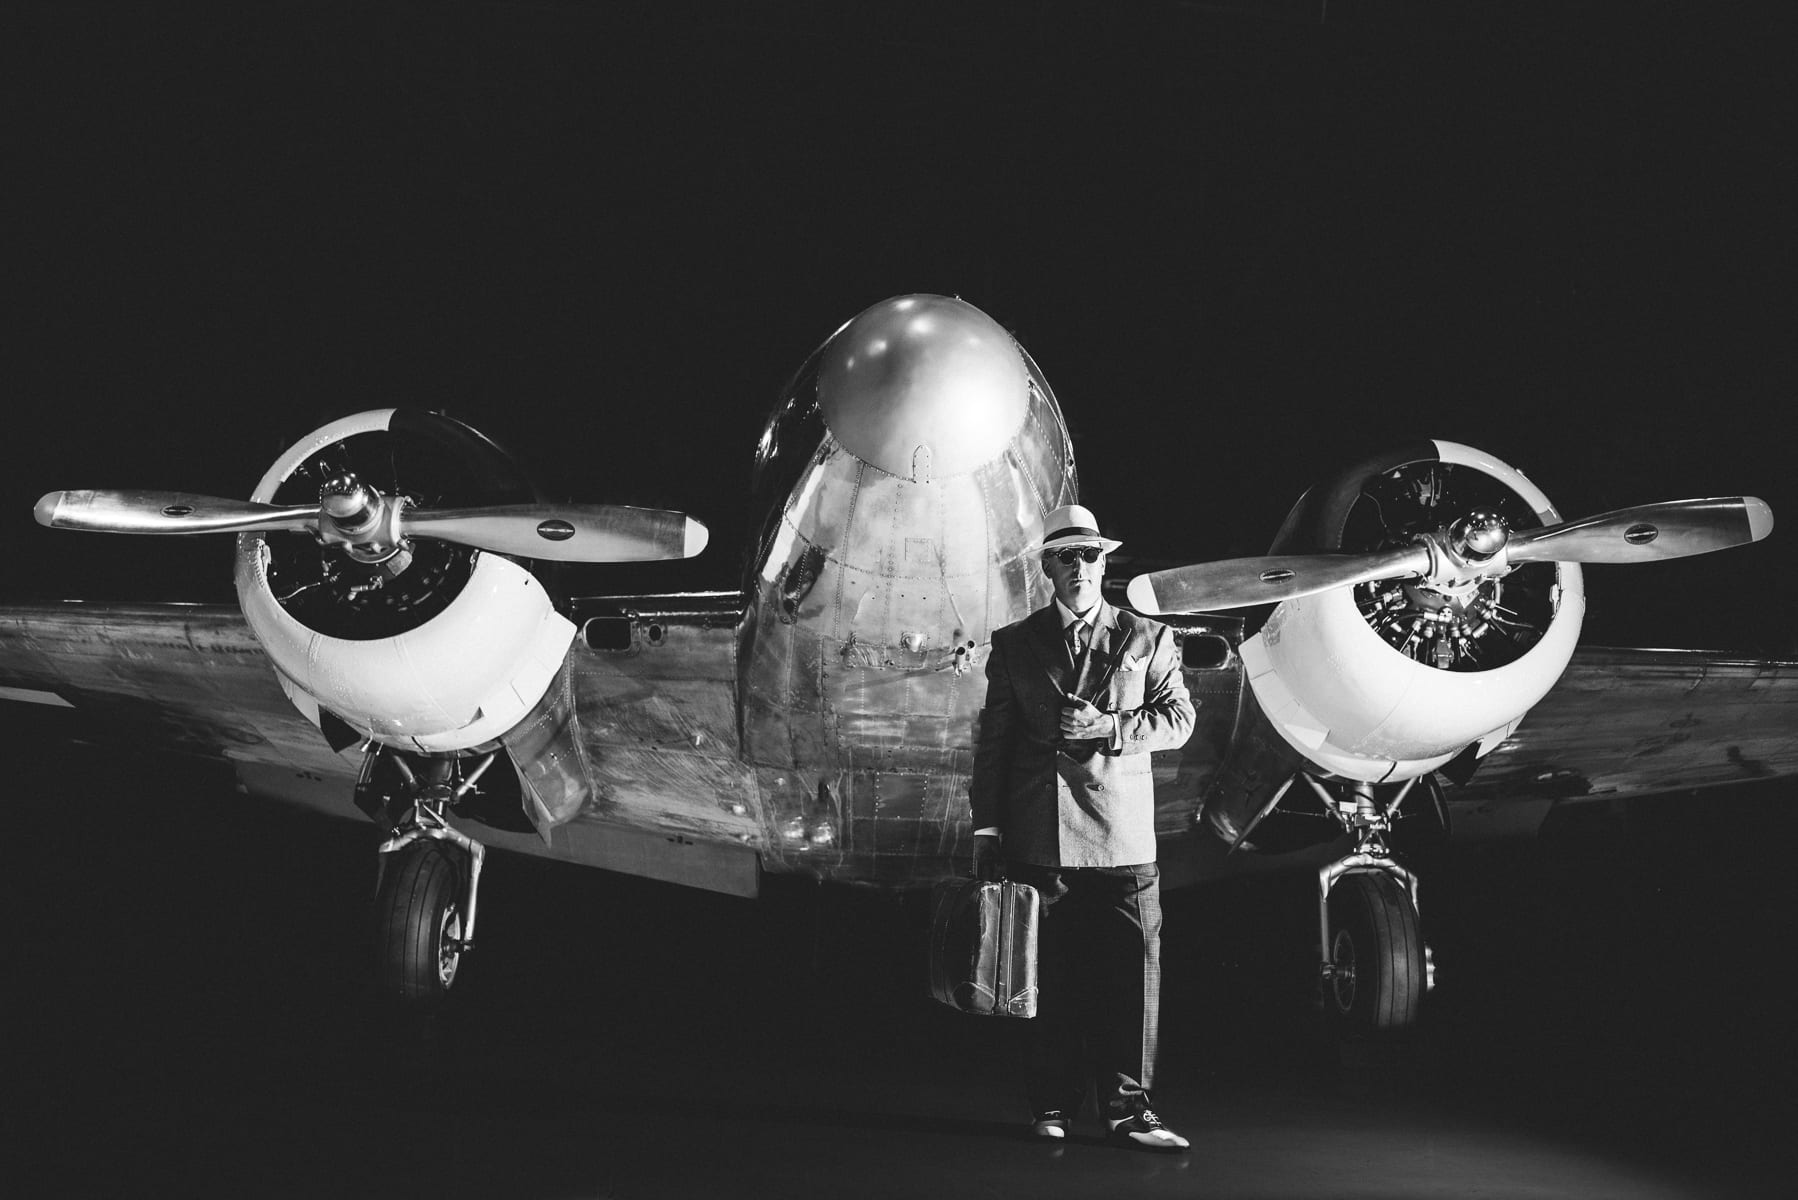 World War II Inspired Photo Shoot at Wings Over the Rockies Air & Space Museum | Denver, CO | Fashion Photography | From the Hip Photo